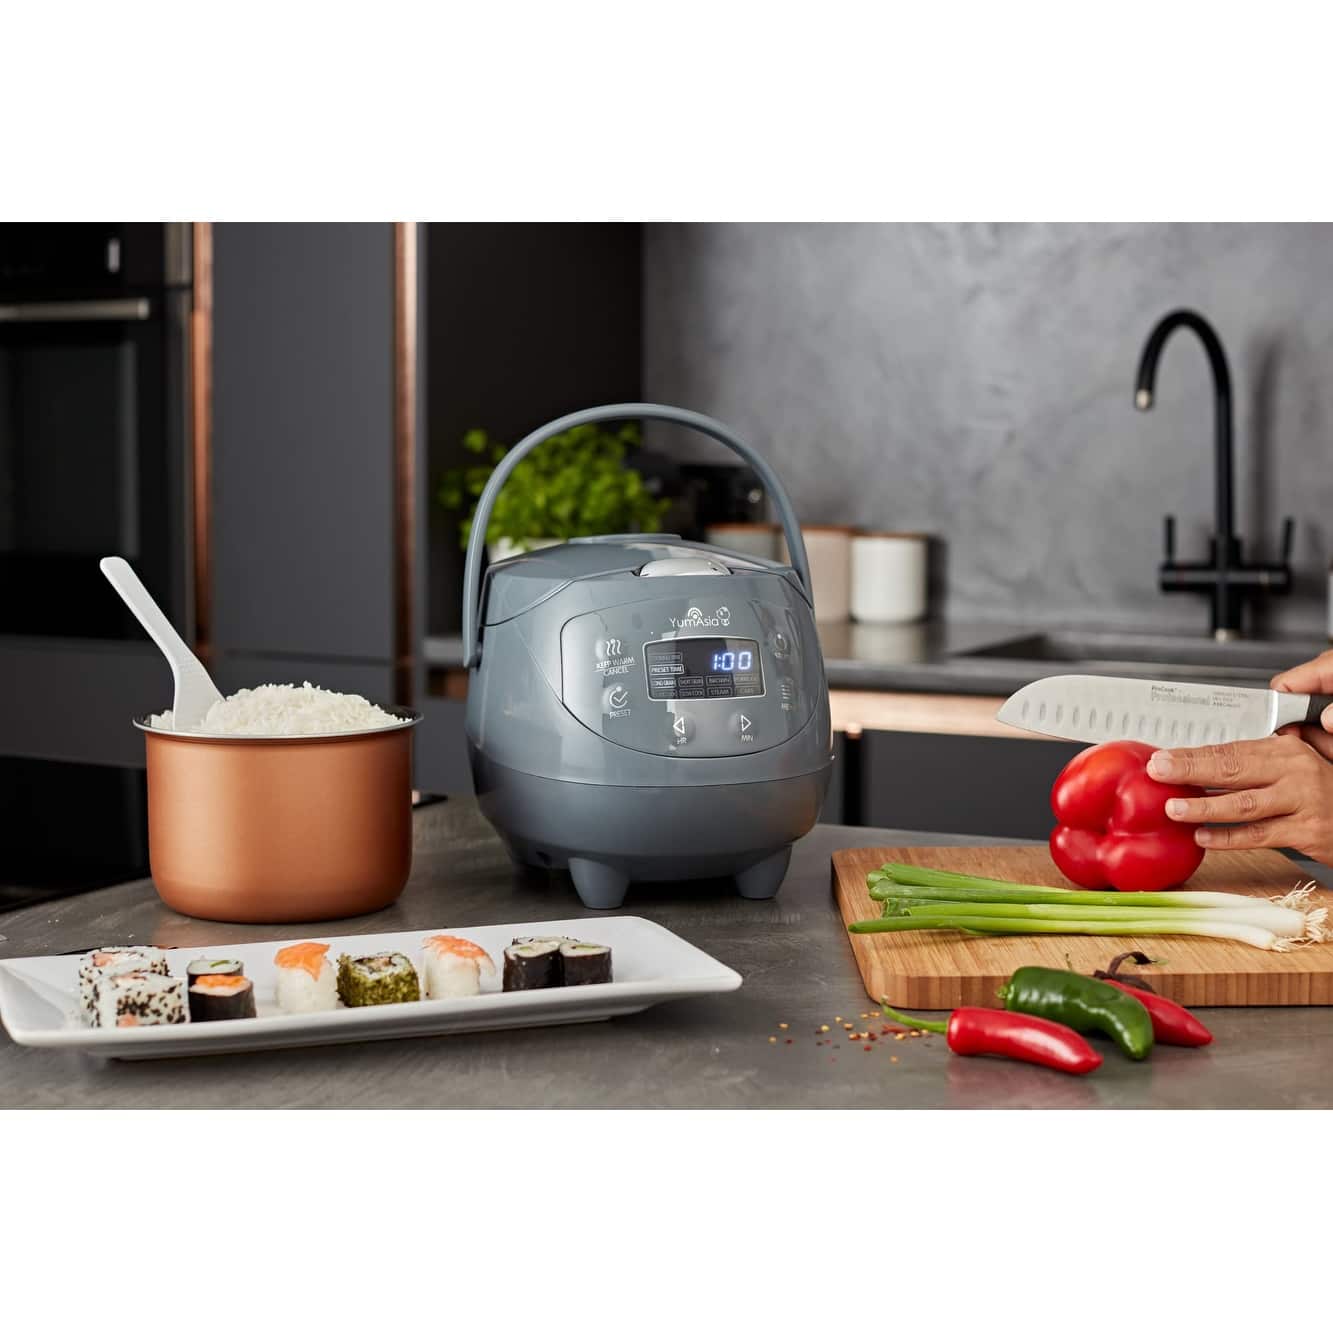 Mini Rice Cooker With Ceramic Bowl and Fuzzy Logic (3.5 cup, 0.63 litre ...